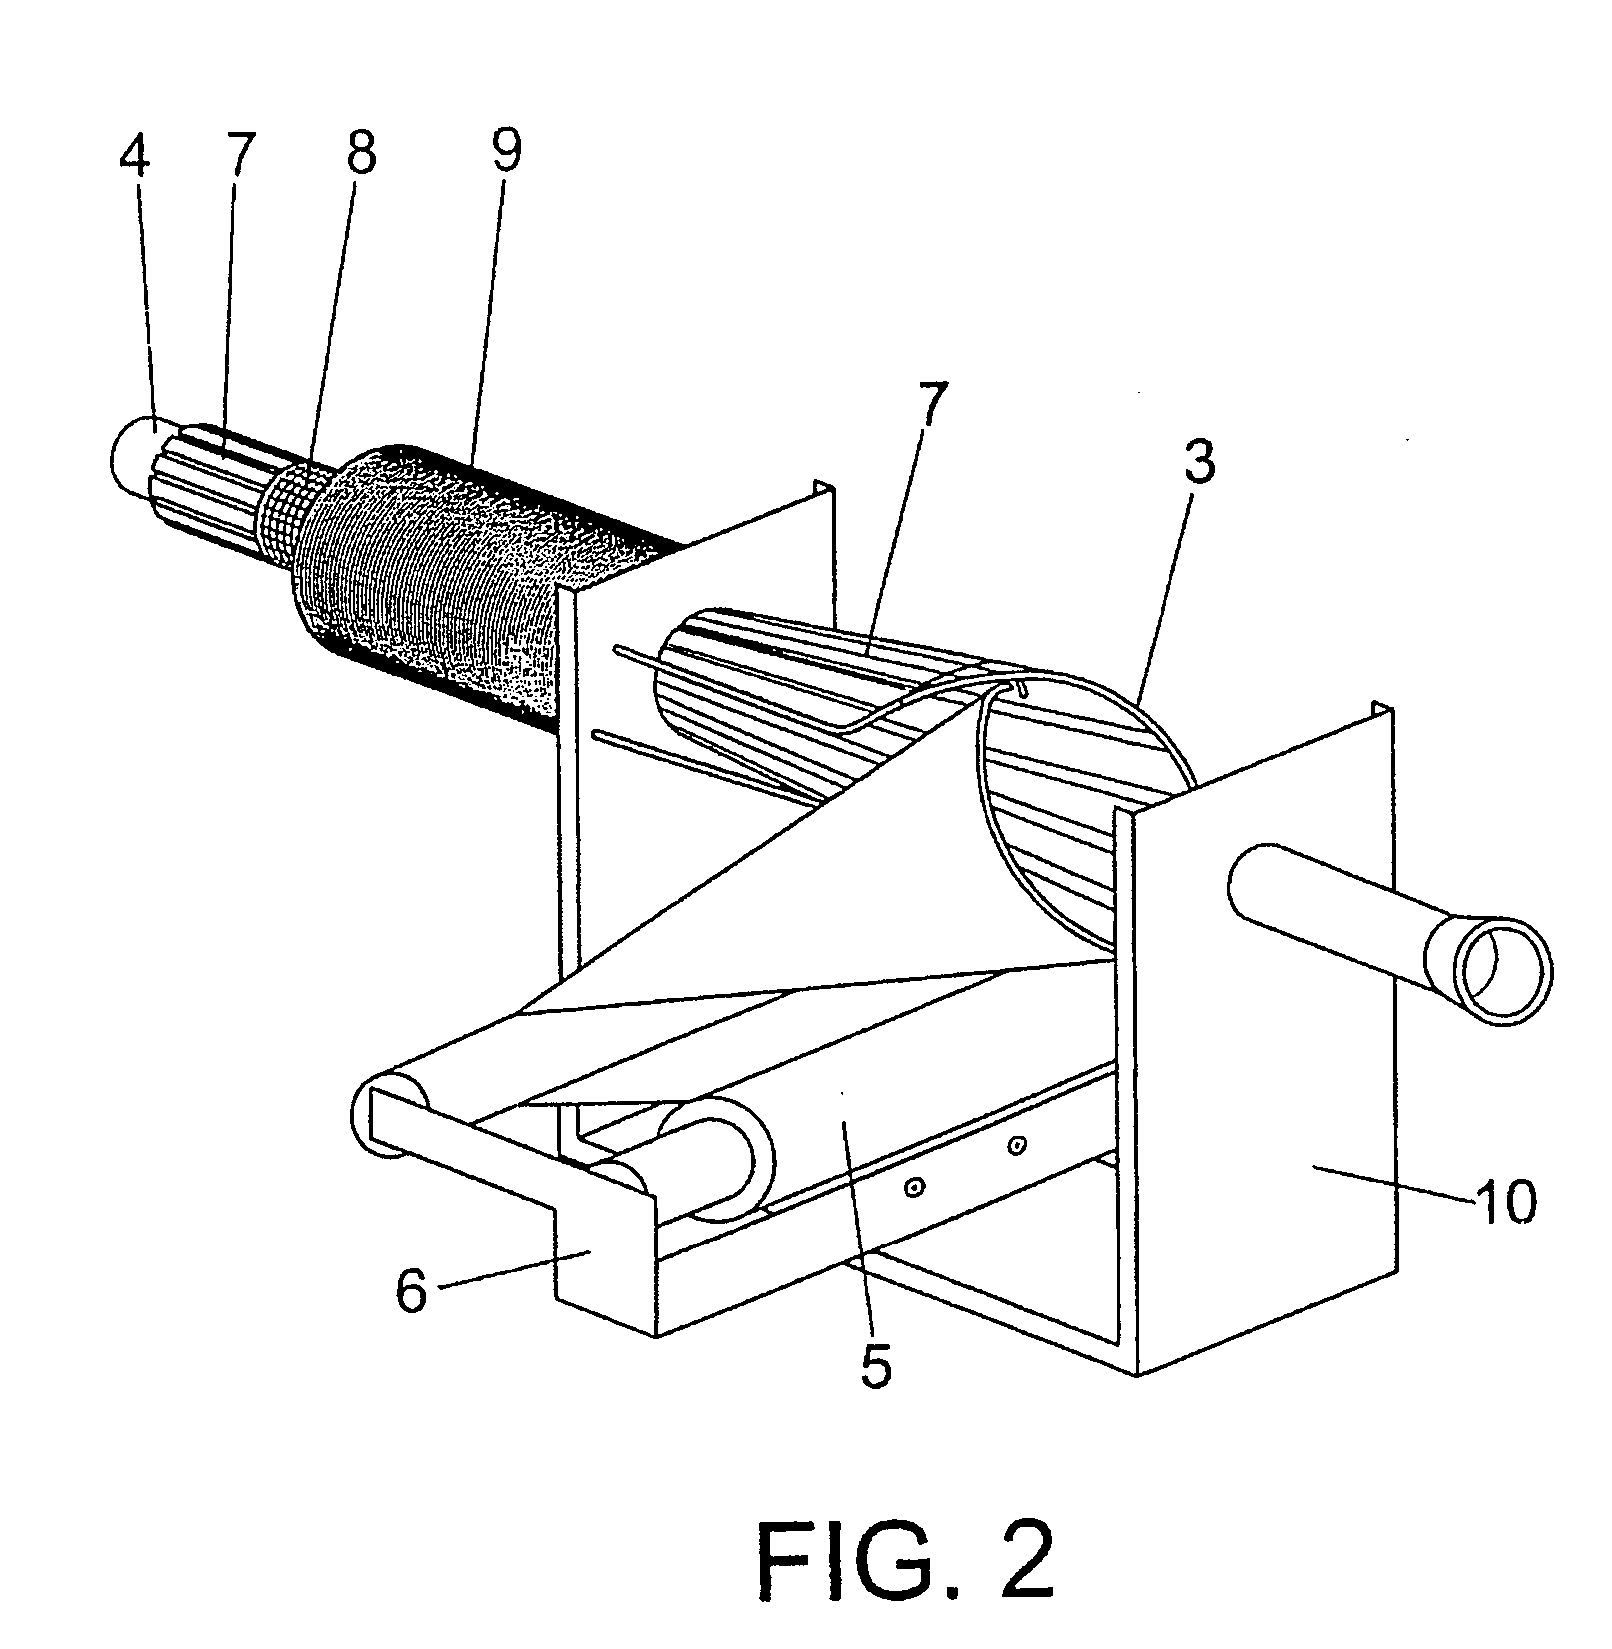 Method and apparatus for the automatic stuffing of meat products into a double casing comprising a sheet and a net